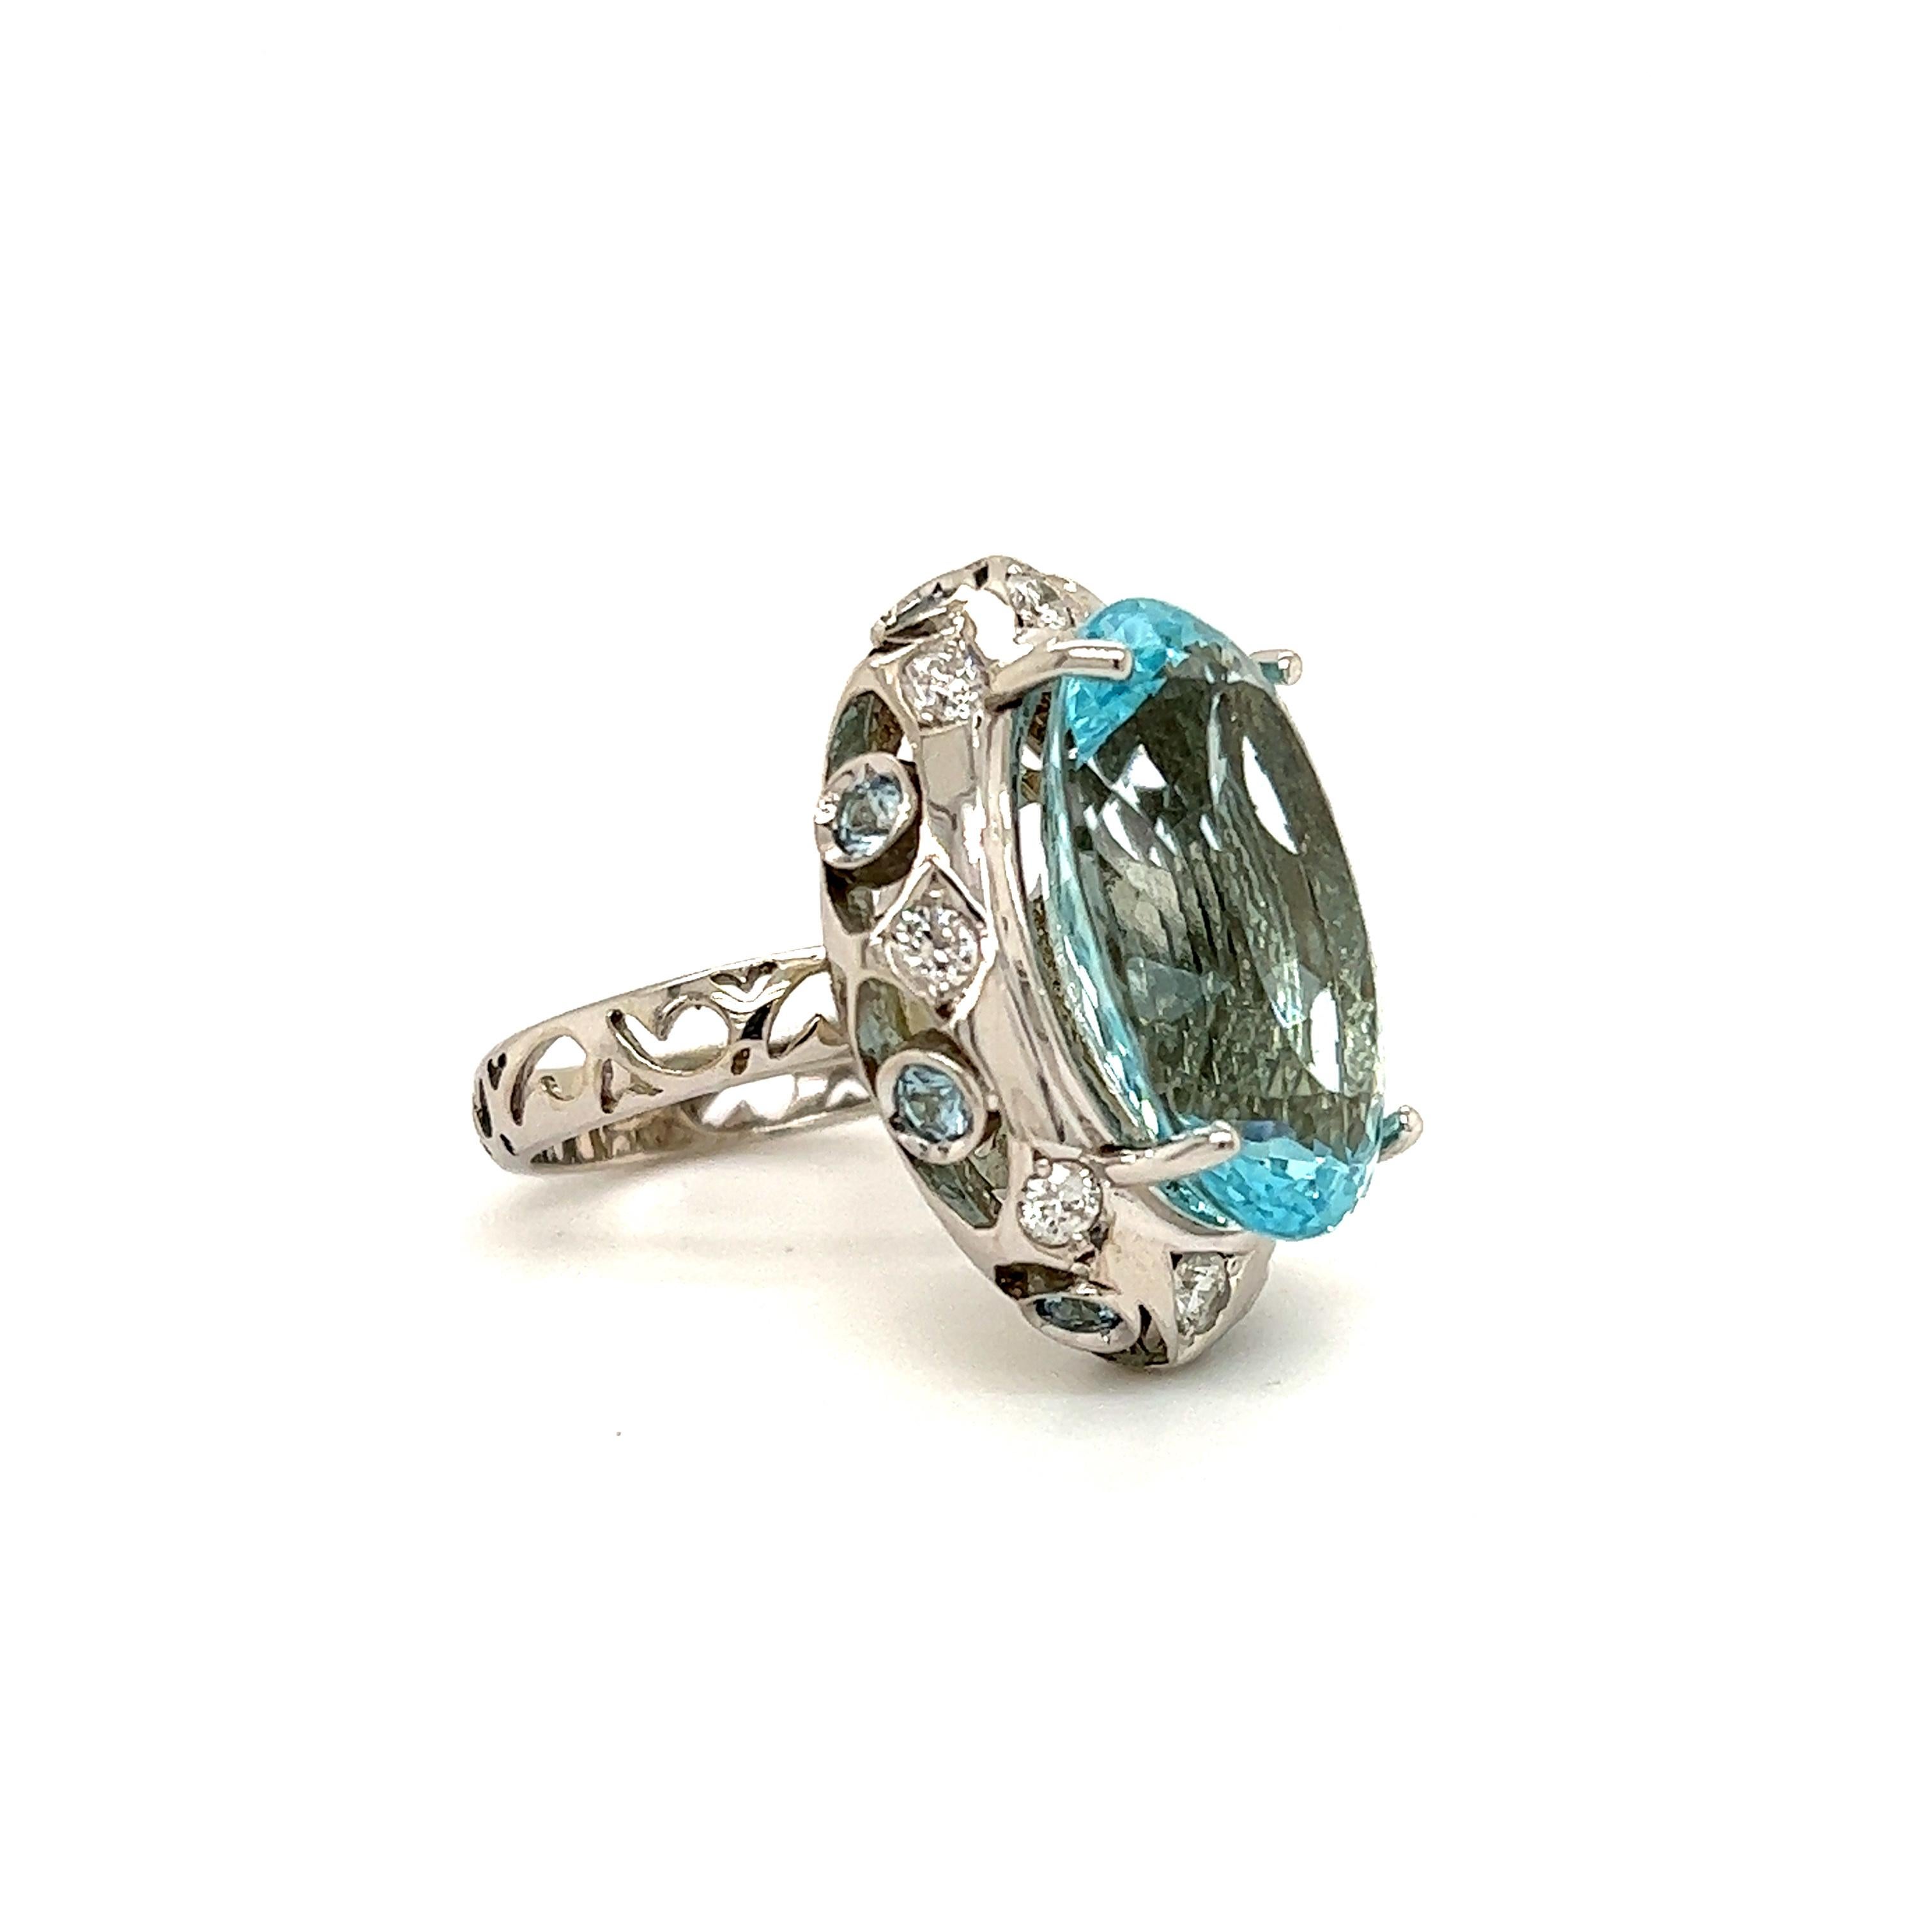 Fantastic design seen on this 14k white gold contemporary cocktail ring. The highlight of the ring is one large oval cut aqua marine gemstone. The aqua marine gemstone displays a whimsical blue color that resembles the ocean on a perfect day. The